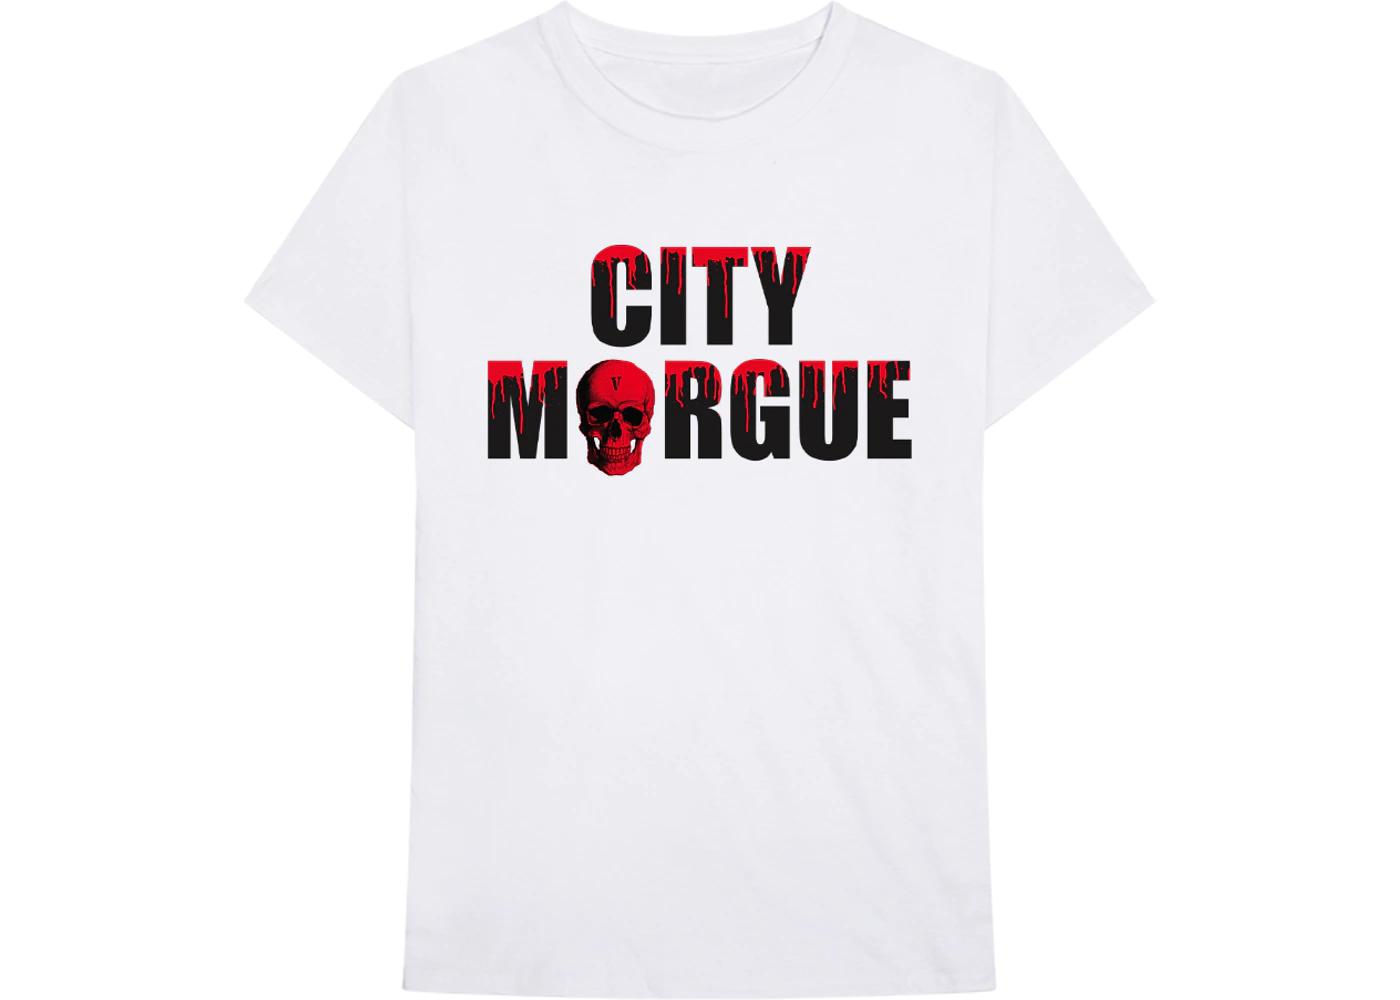 City Morgue x Vlone Dogs Tee White by CITY MORGUE